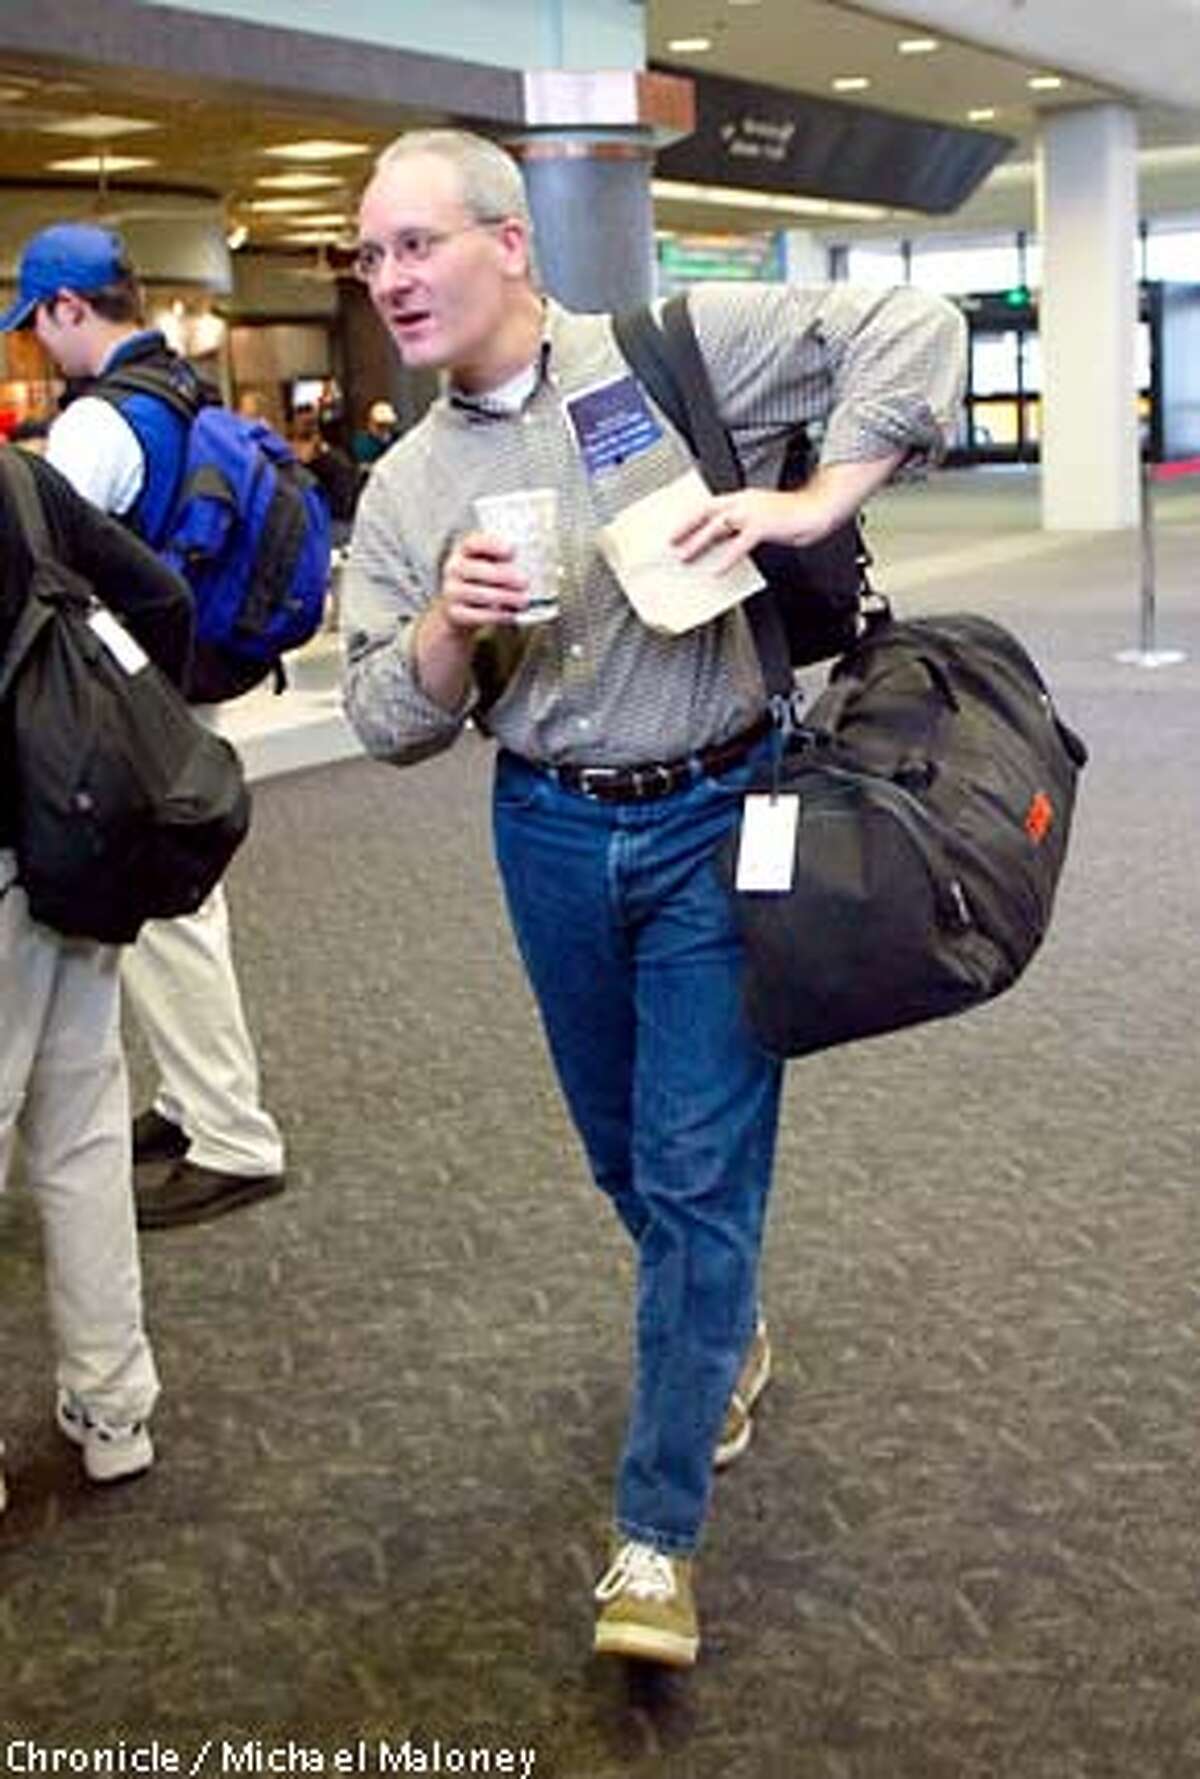 At SFO, passenger Tom Furnas of Cleveland prepares to pass through the security checkpoint with a double mocha in his hand. He was returning to Cleveland after a business trip in SF. He passed through the metal detectors with no problem. New security measures may soon ban any open containers of food and drink at airport security checkpoints. At SFO, it is currently not being enforced. CHRONICLE PHOTO BY MICHAEL MALONEY